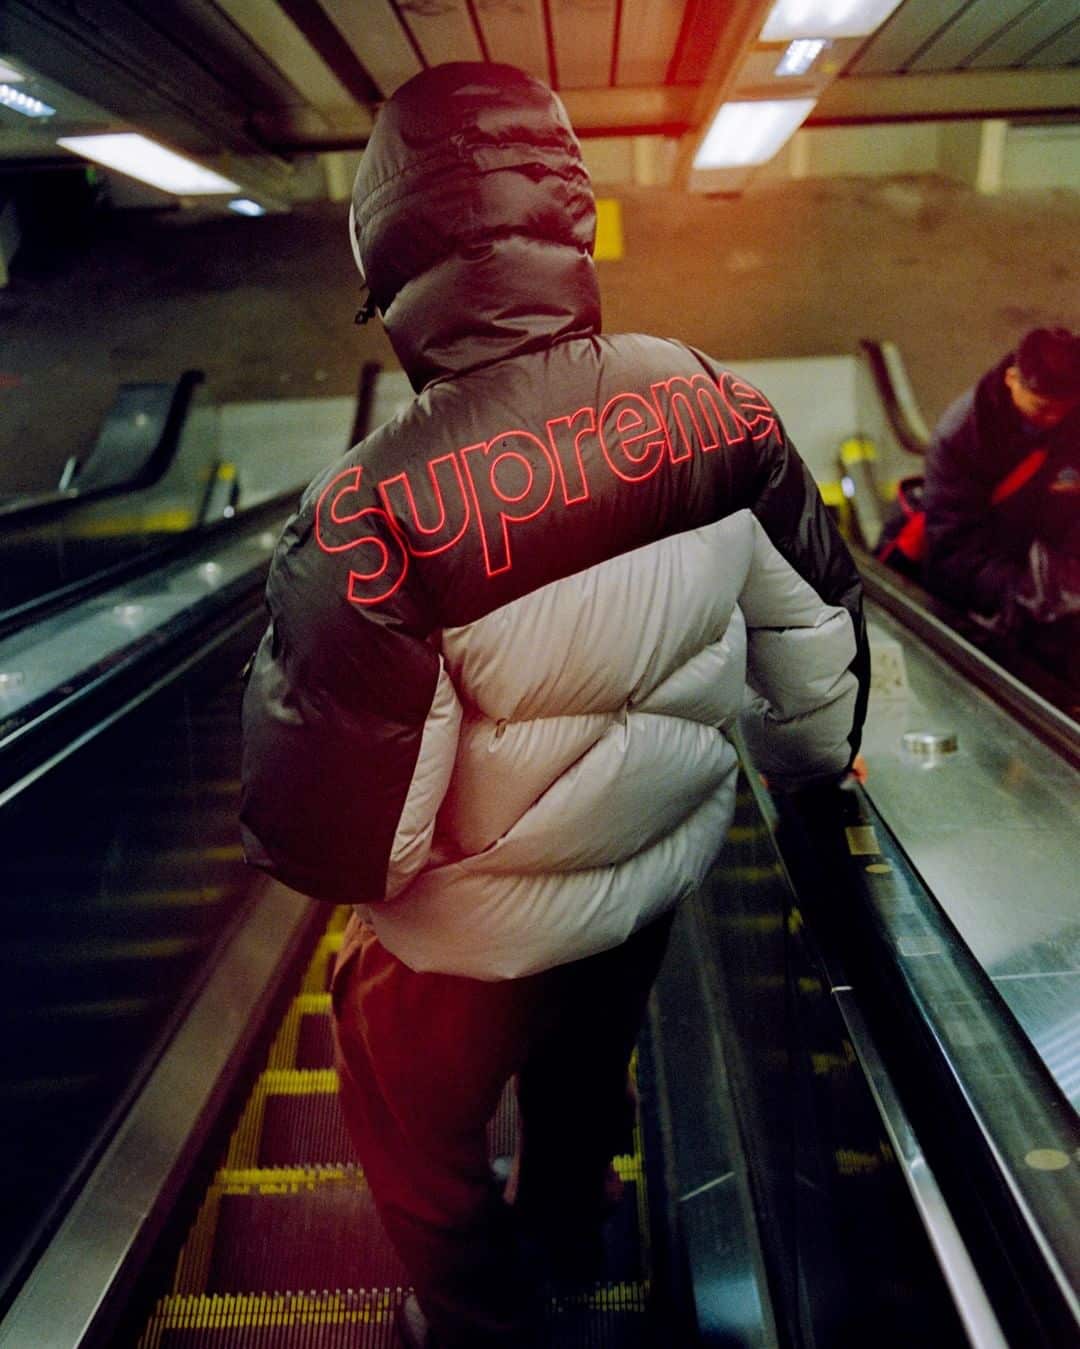 Supreme x Louis Vuitton Second Collab Rumored for 2022